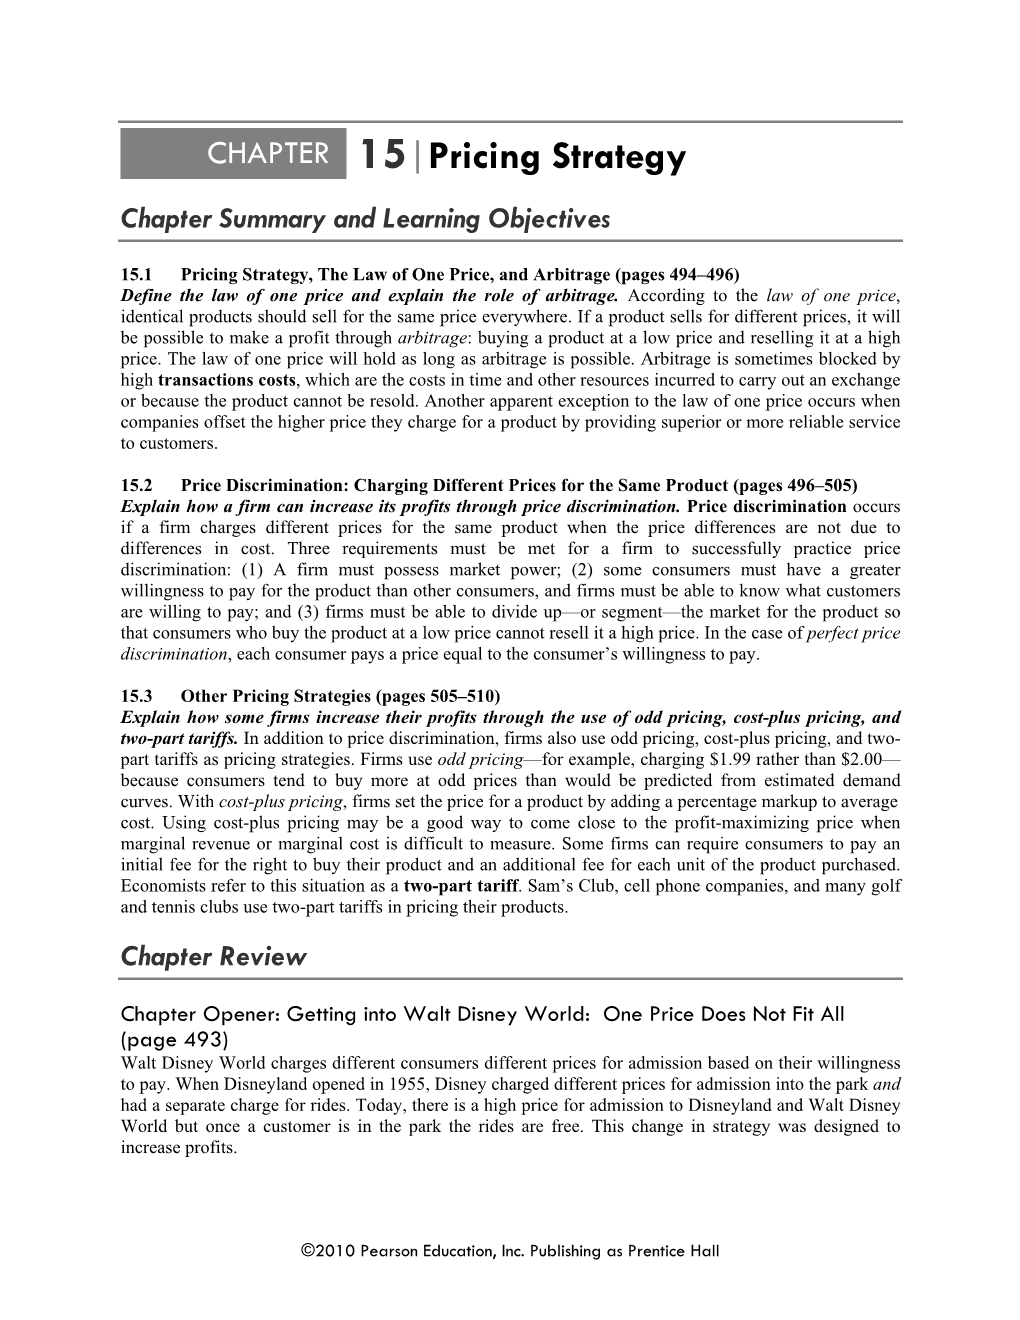 CHAPTER 15|Pricing Strategy